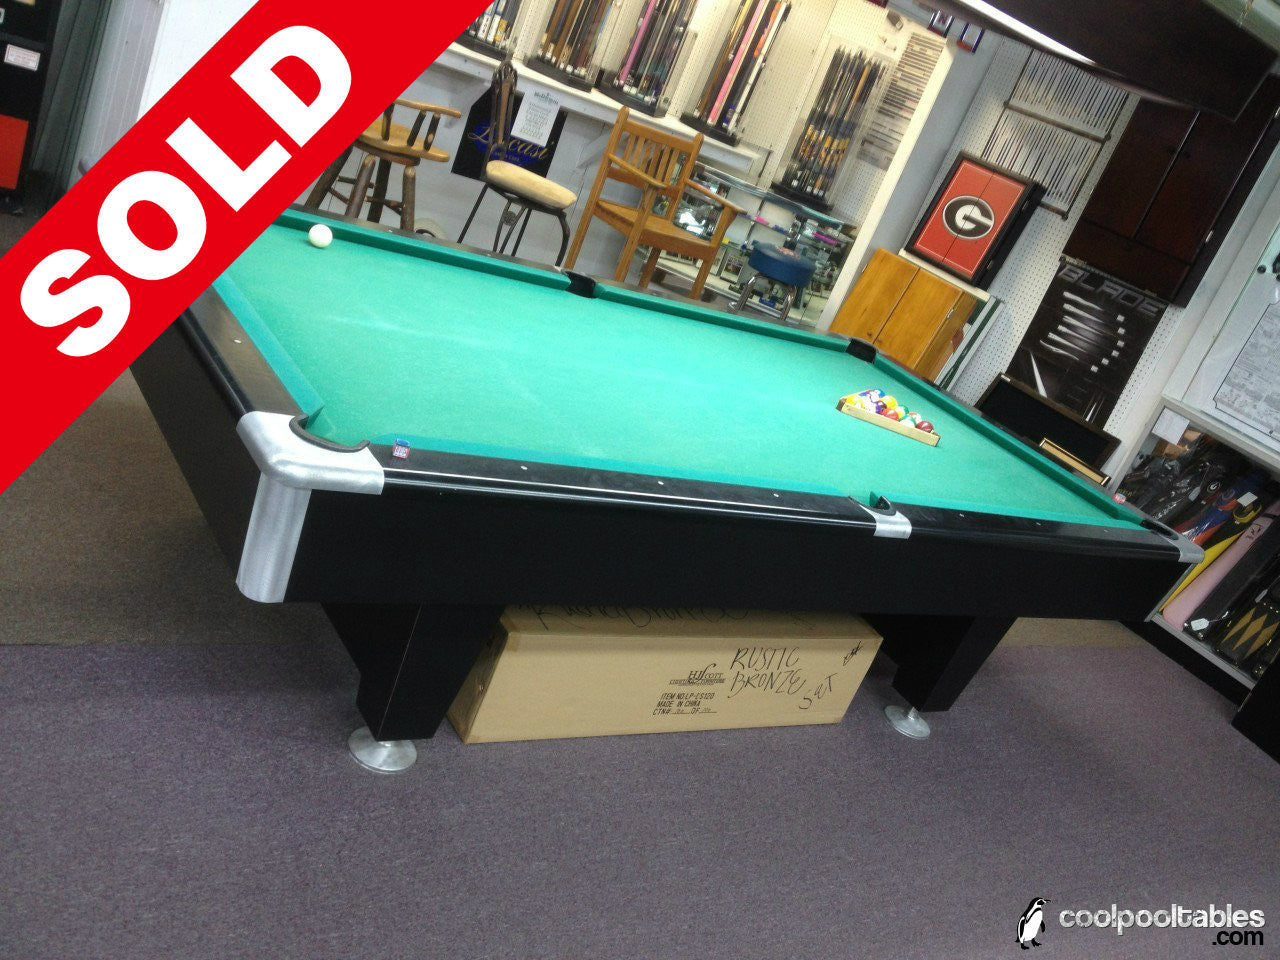 Used 9 Kasson Pool Table With With Commercial Grade Construction Coolpooltablescom